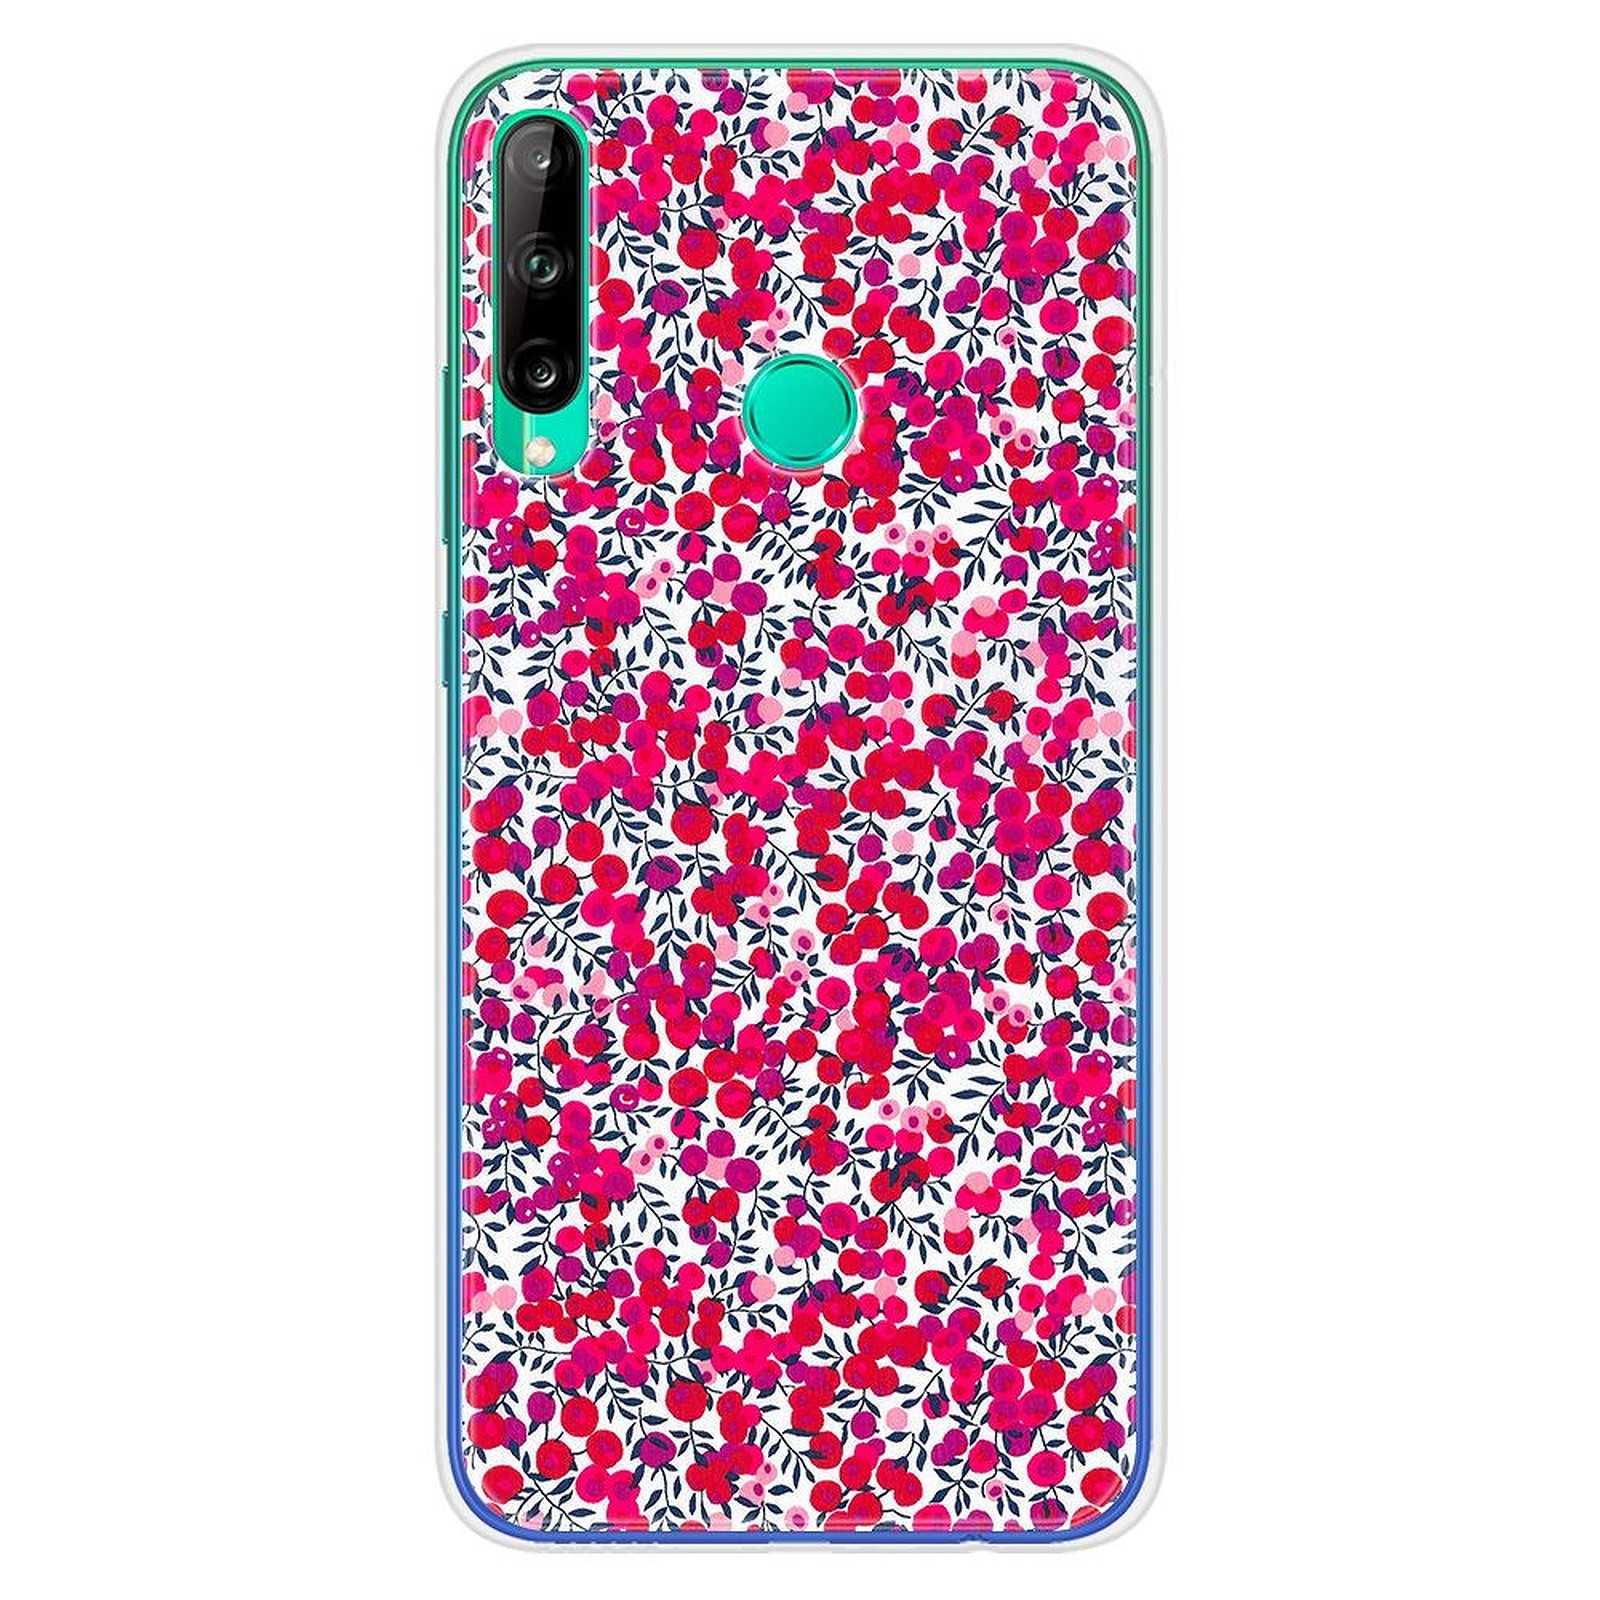 1001 Coques Coque silicone gel Huawei P40 Lite E motif Liberty Wiltshire Rouge - Coque telephone 1001Coques